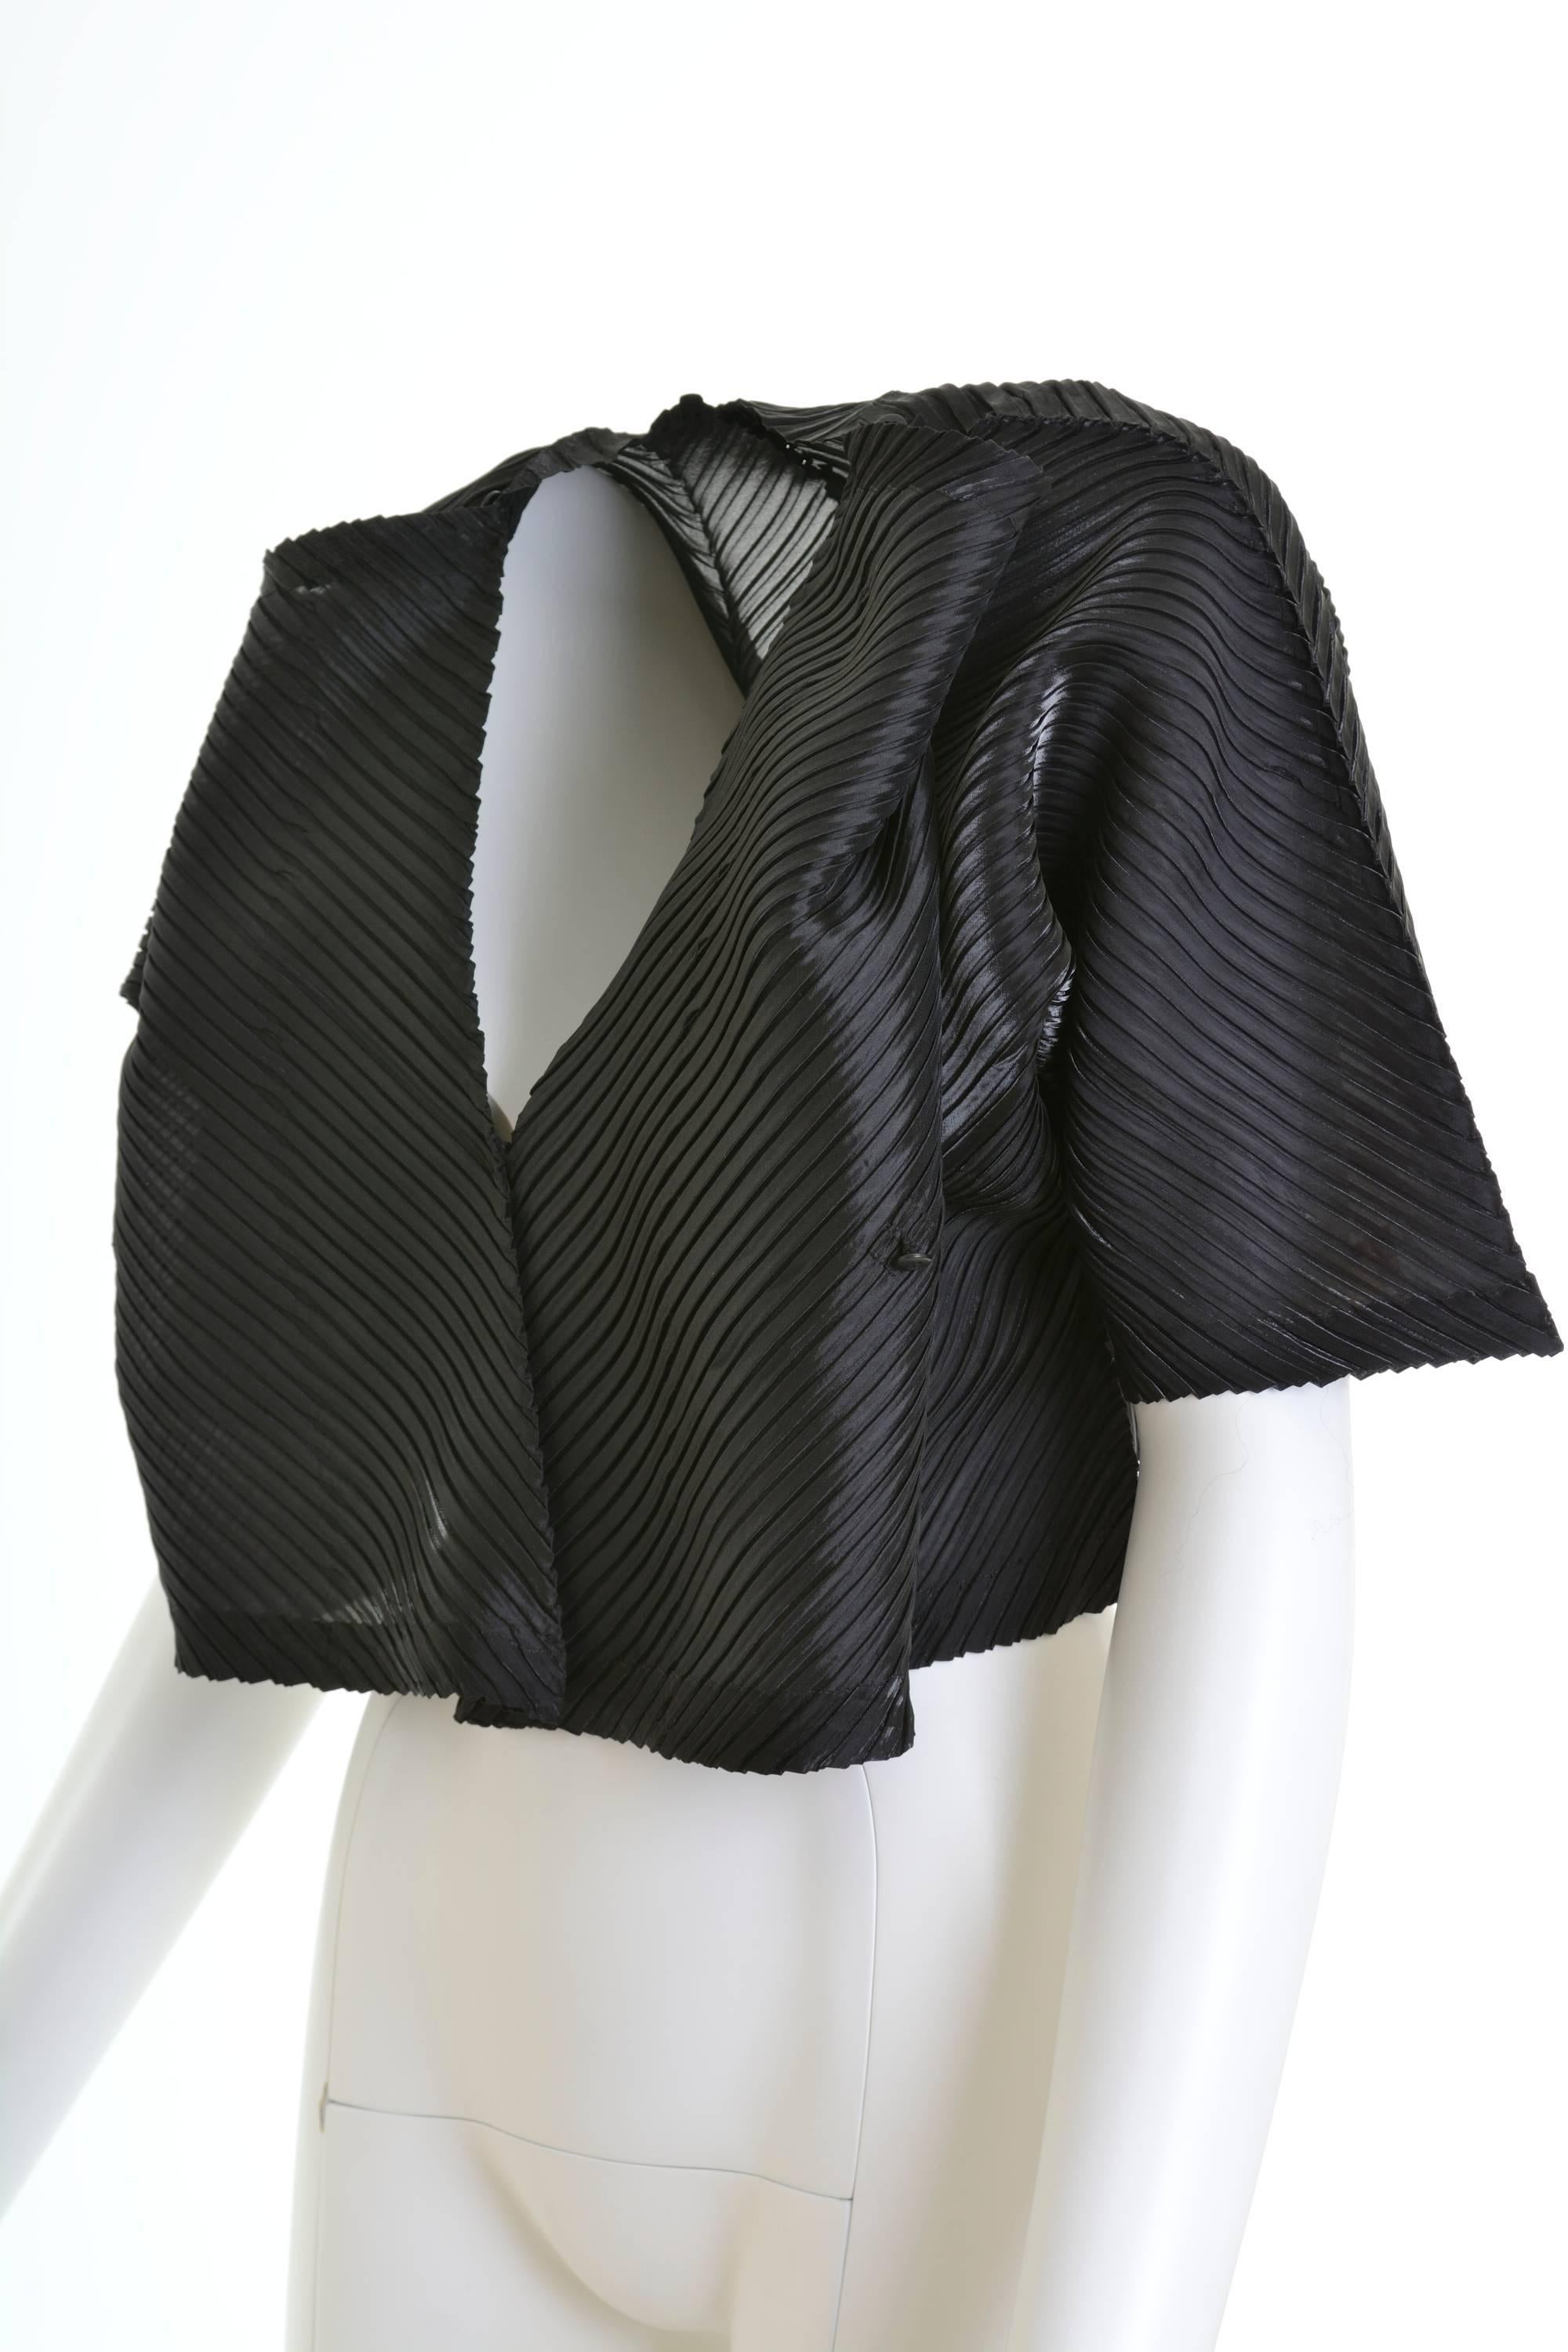 ISSEY MIYAKE Black Pleateds Shirt Top For Sale 1